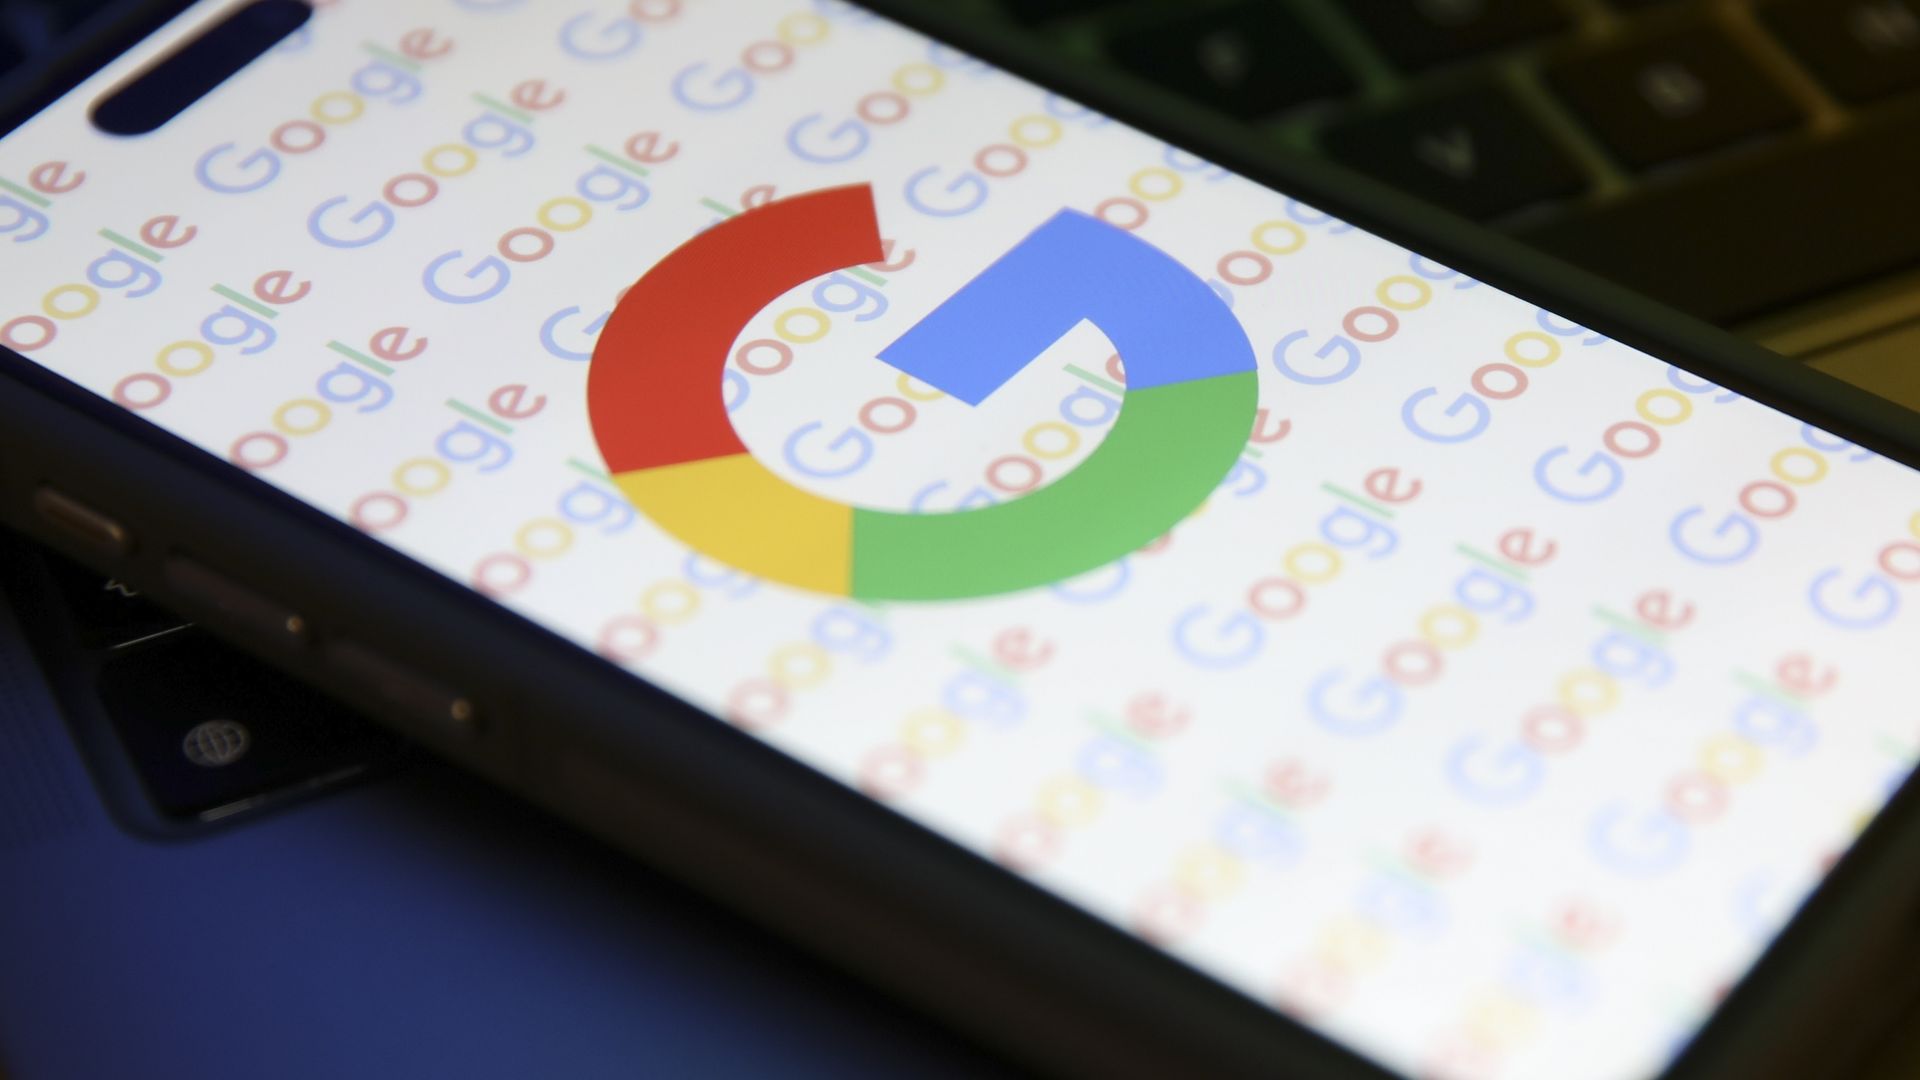 Google has agreed to pay 0 million and allow for greater competition in its app store as part of an antitrust settlement.